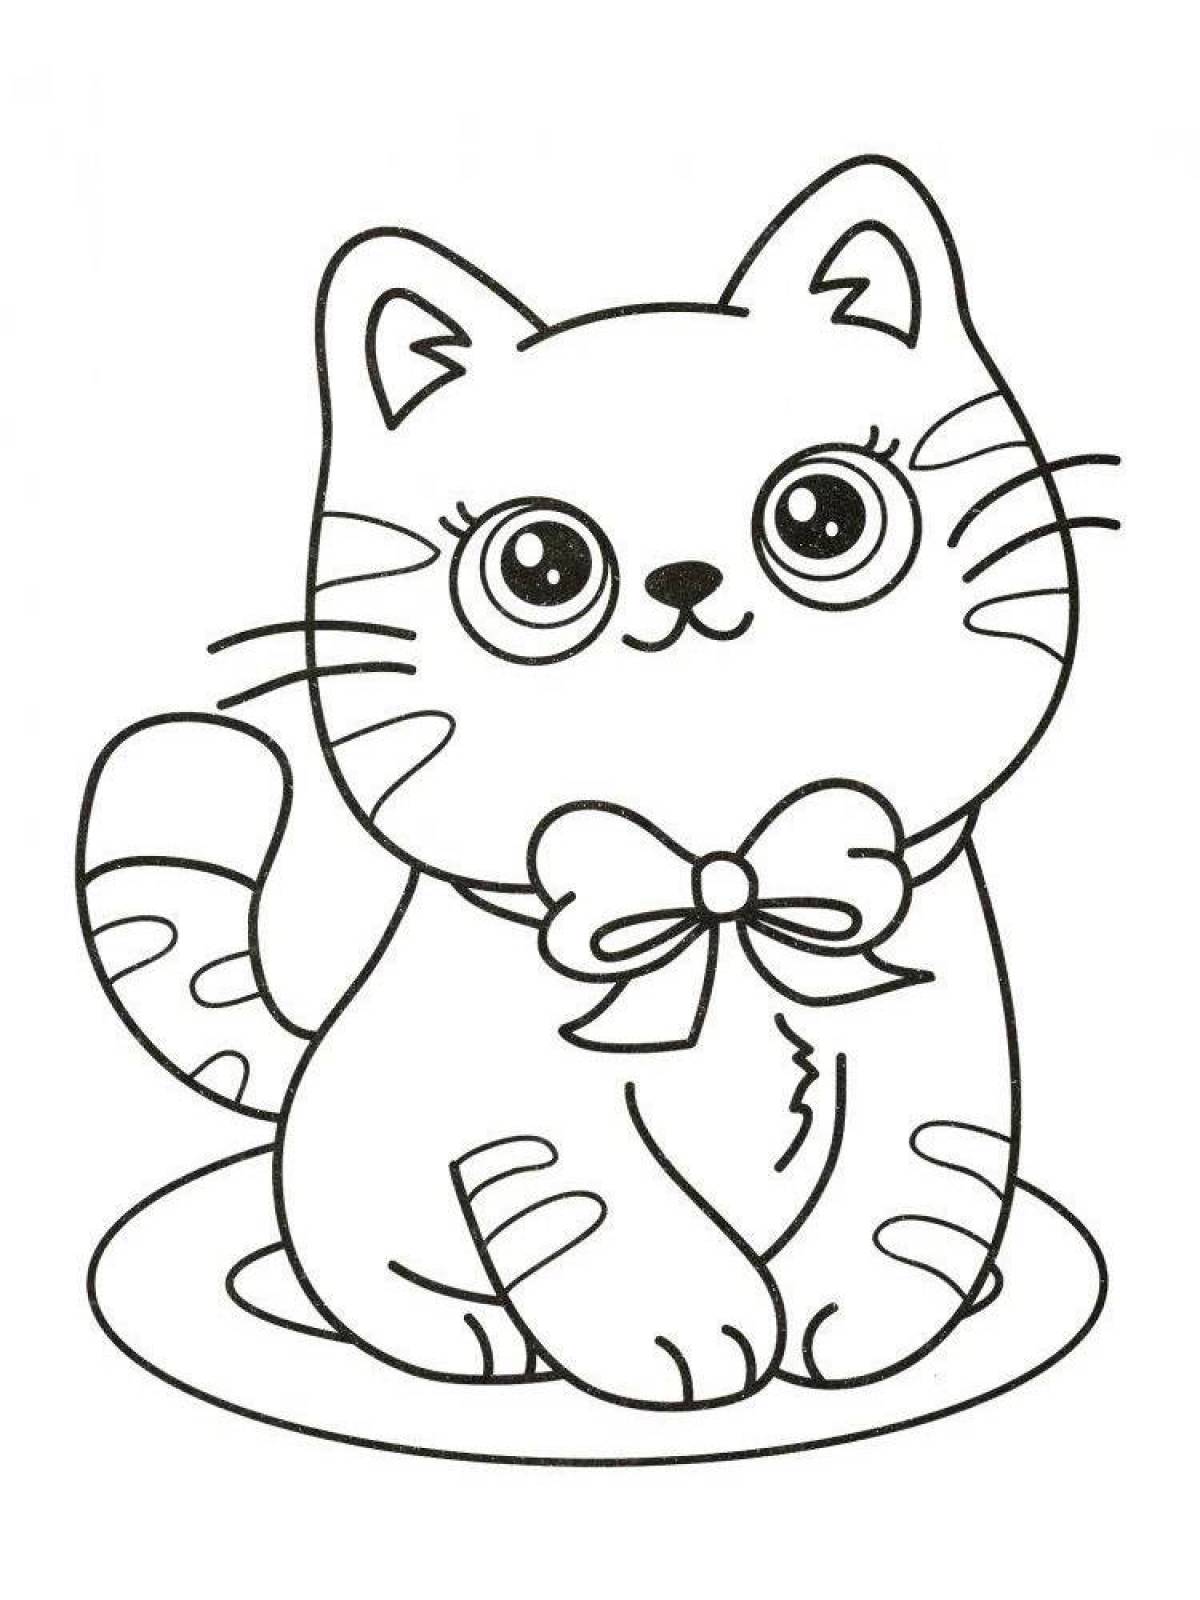 Coloring book smart cat for kids